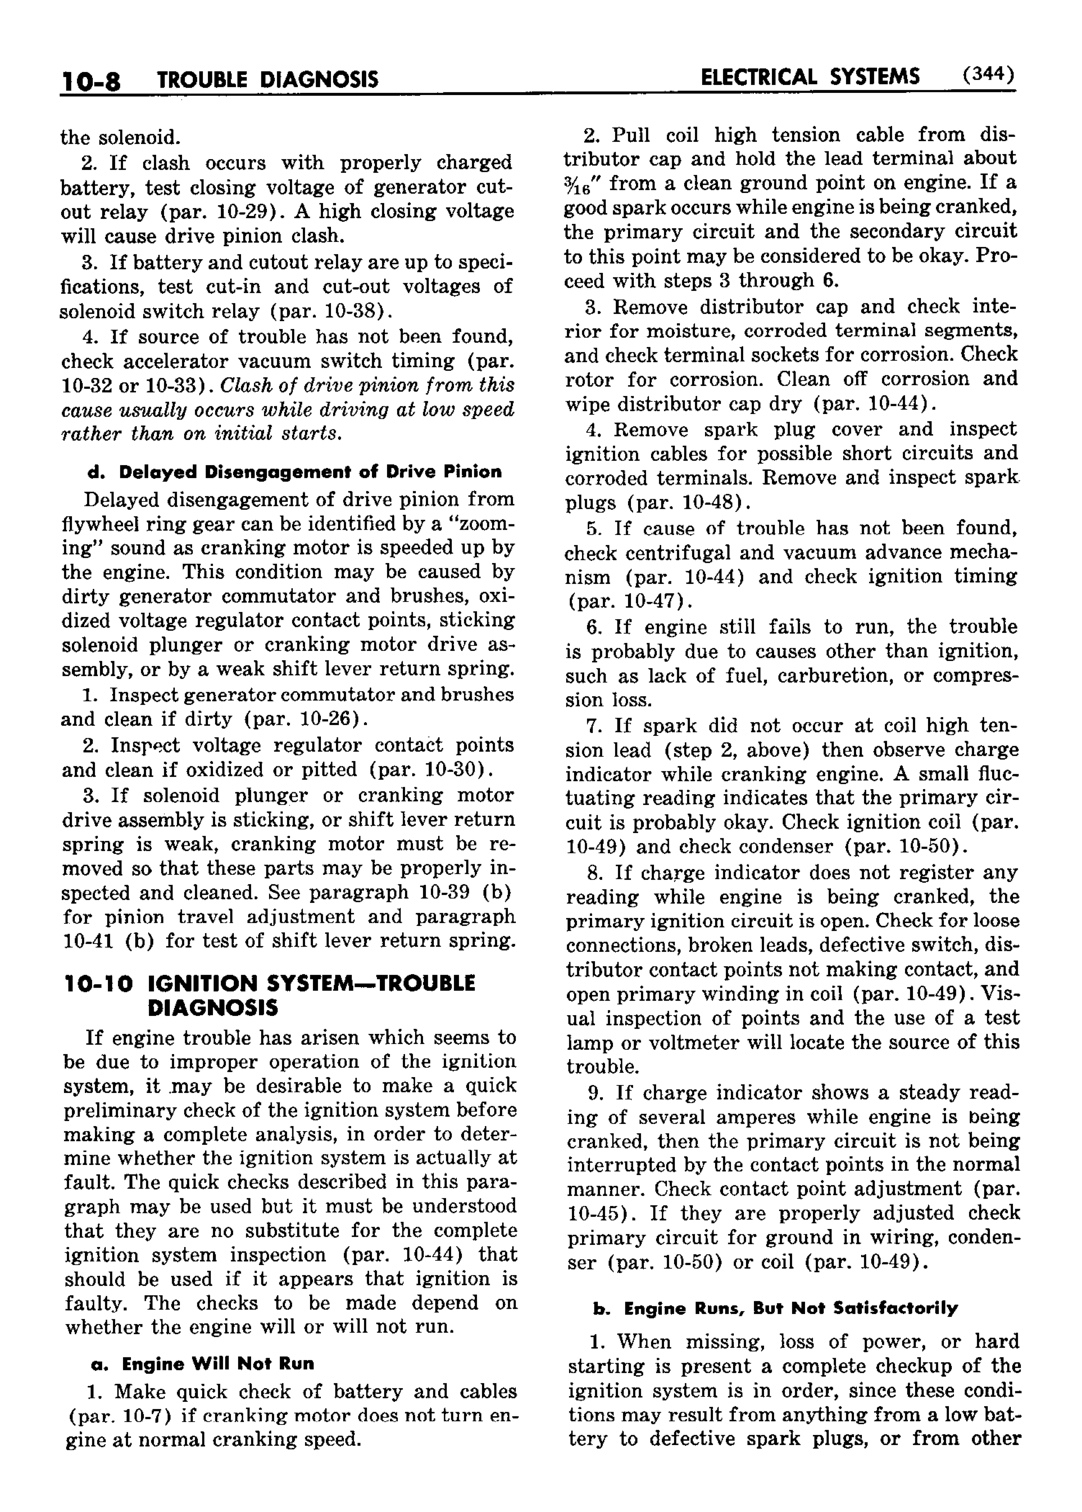 n_11 1952 Buick Shop Manual - Electrical Systems-008-008.jpg